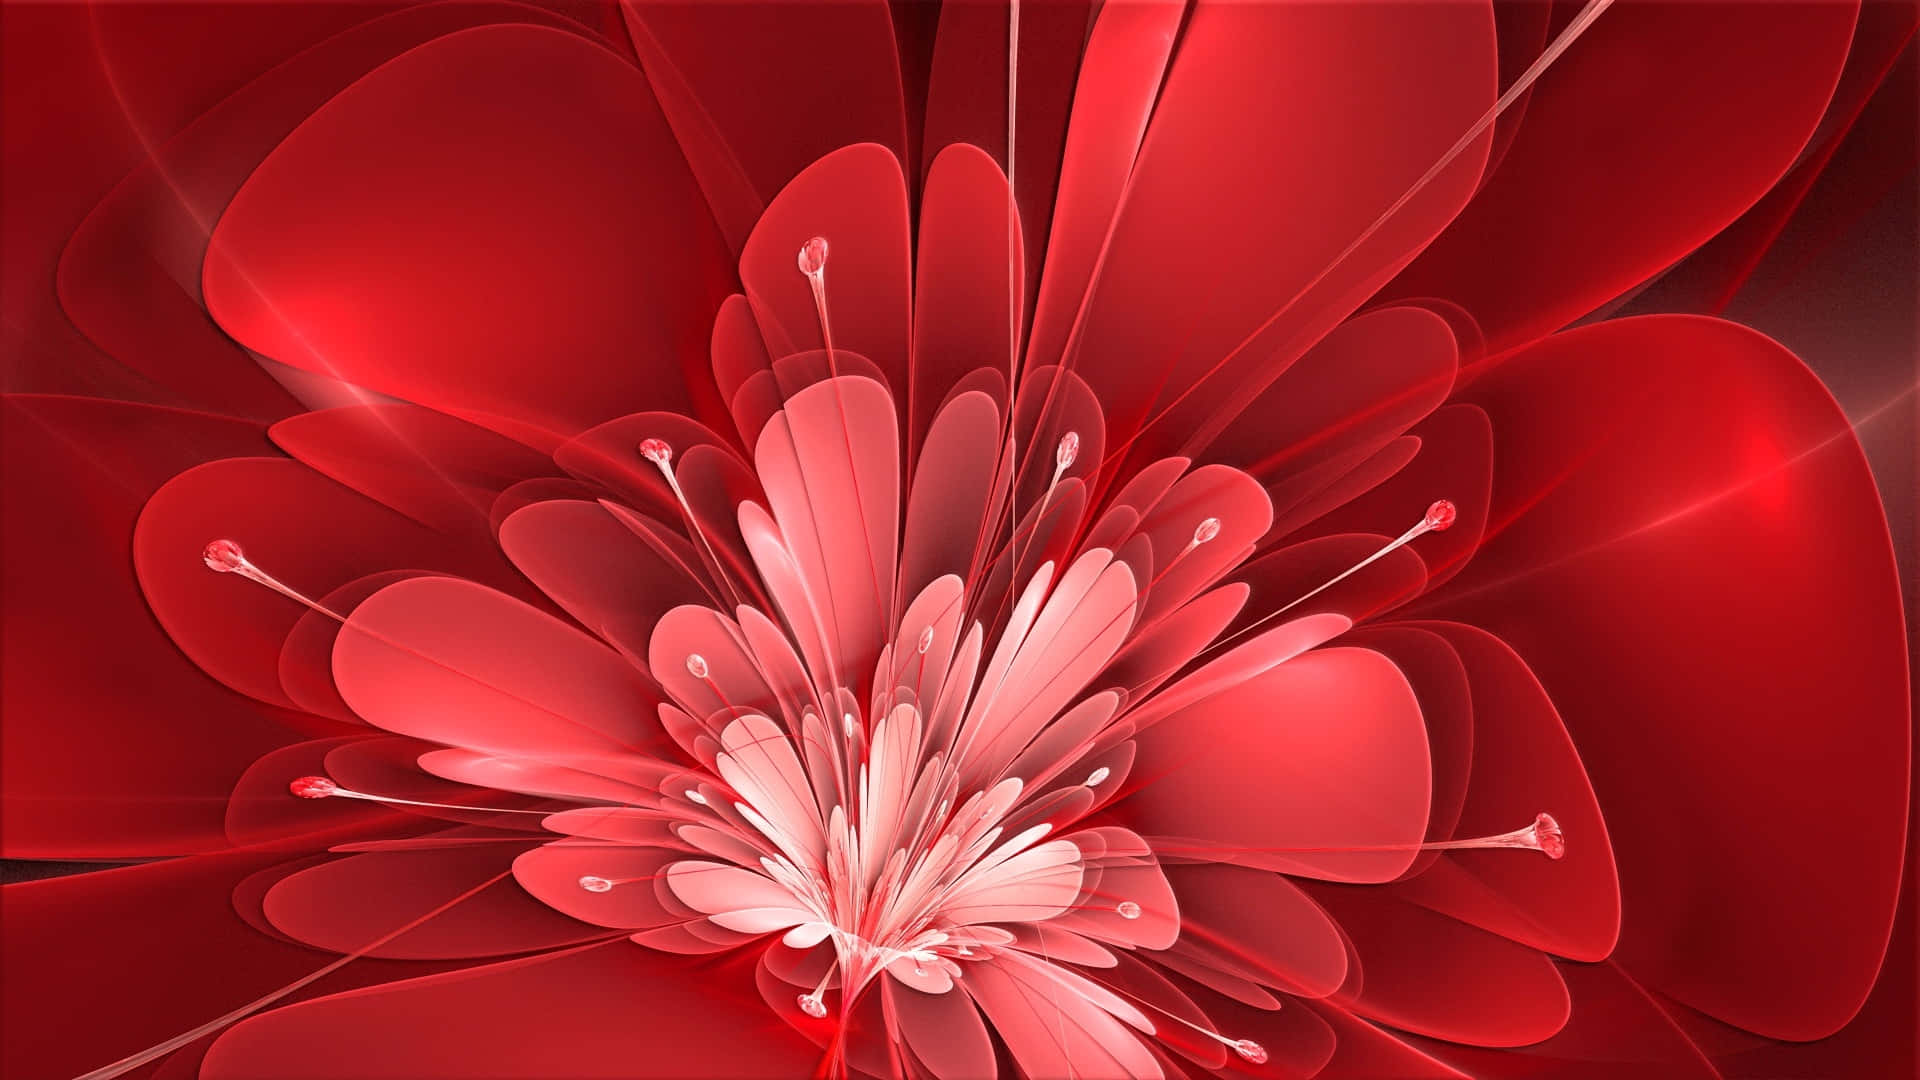 Red Flower Background - High-quality Free Backgrounds